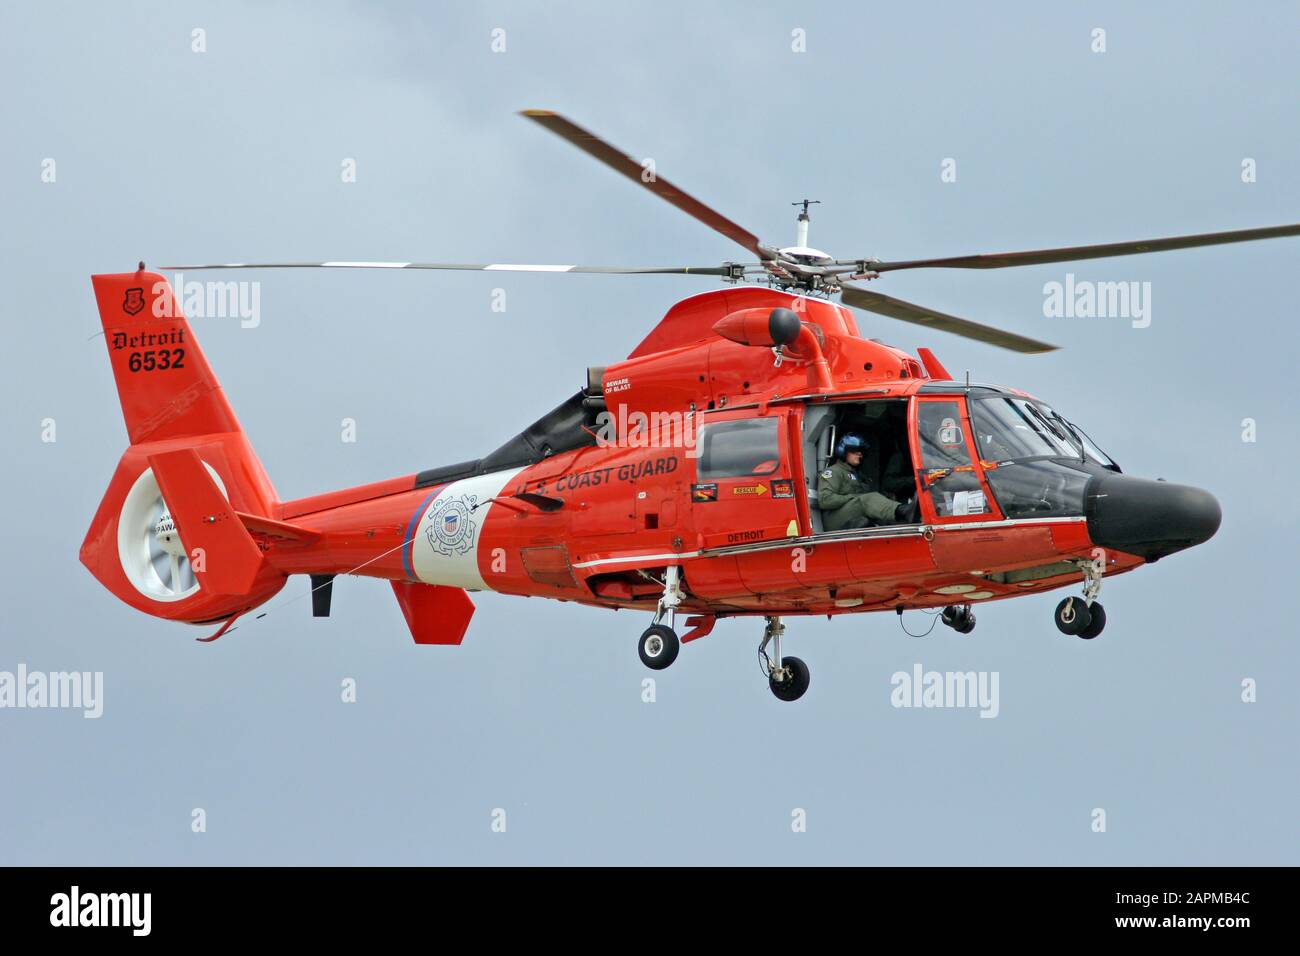 A U.S. Coast Guard HH-65 Dolphin Helicopter during a demonstration flight  at the Wings and Wheels International Airshow Stock Photo - Alamy